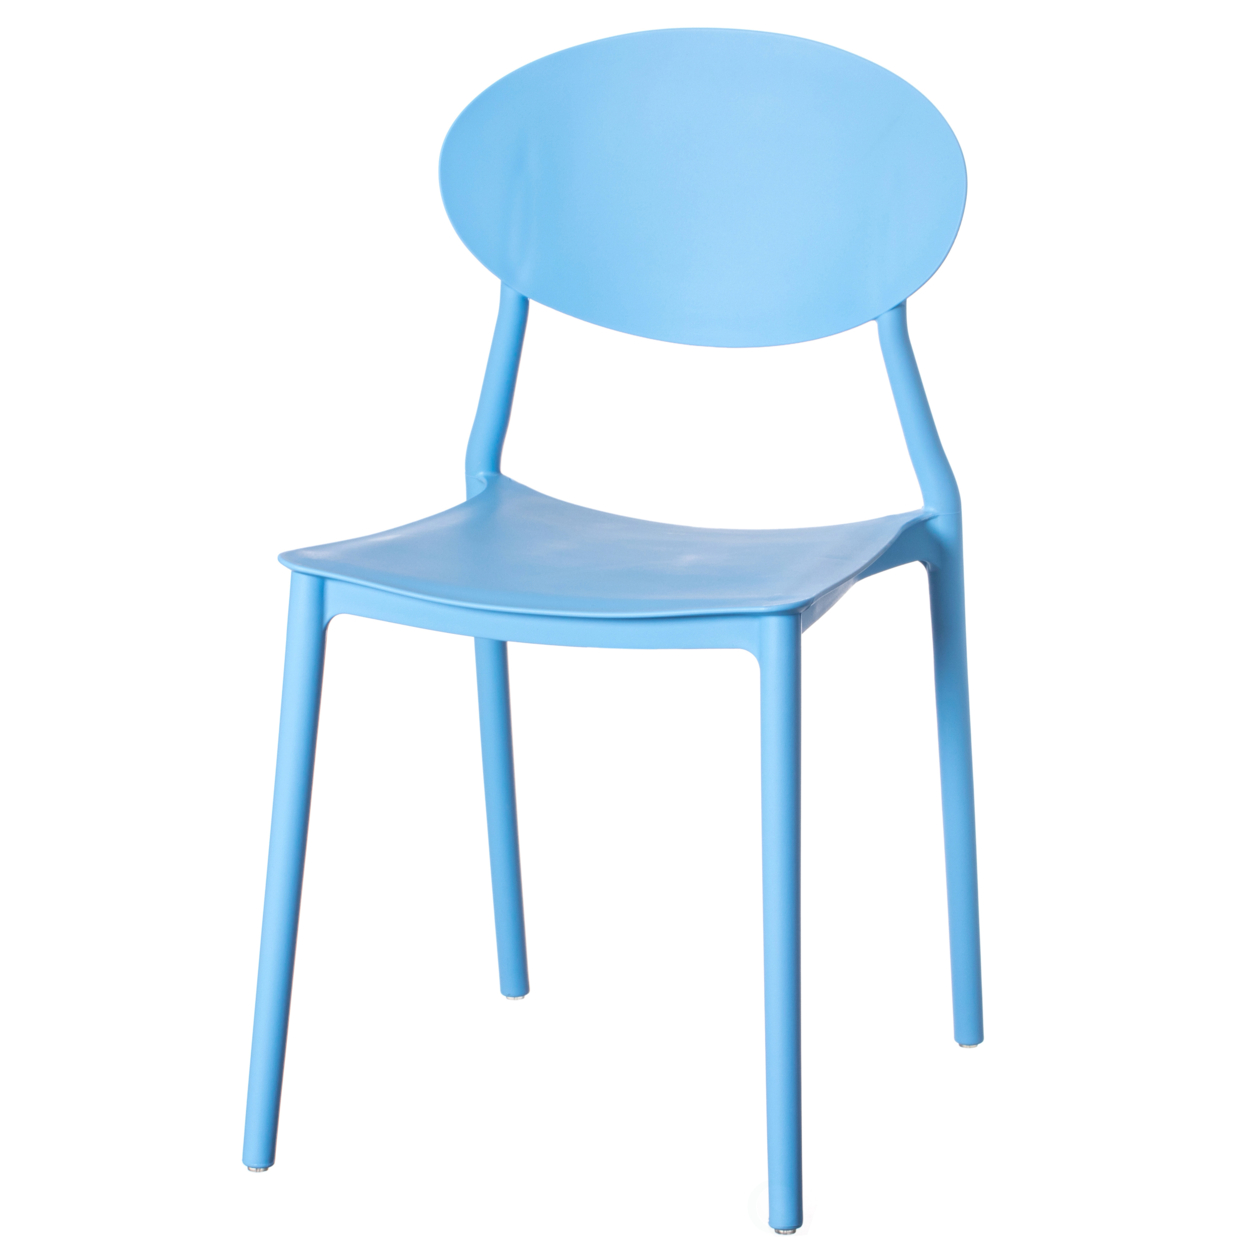 Modern Plastic Outdoor Dining Chair With Open Oval Back Design - Single Blue